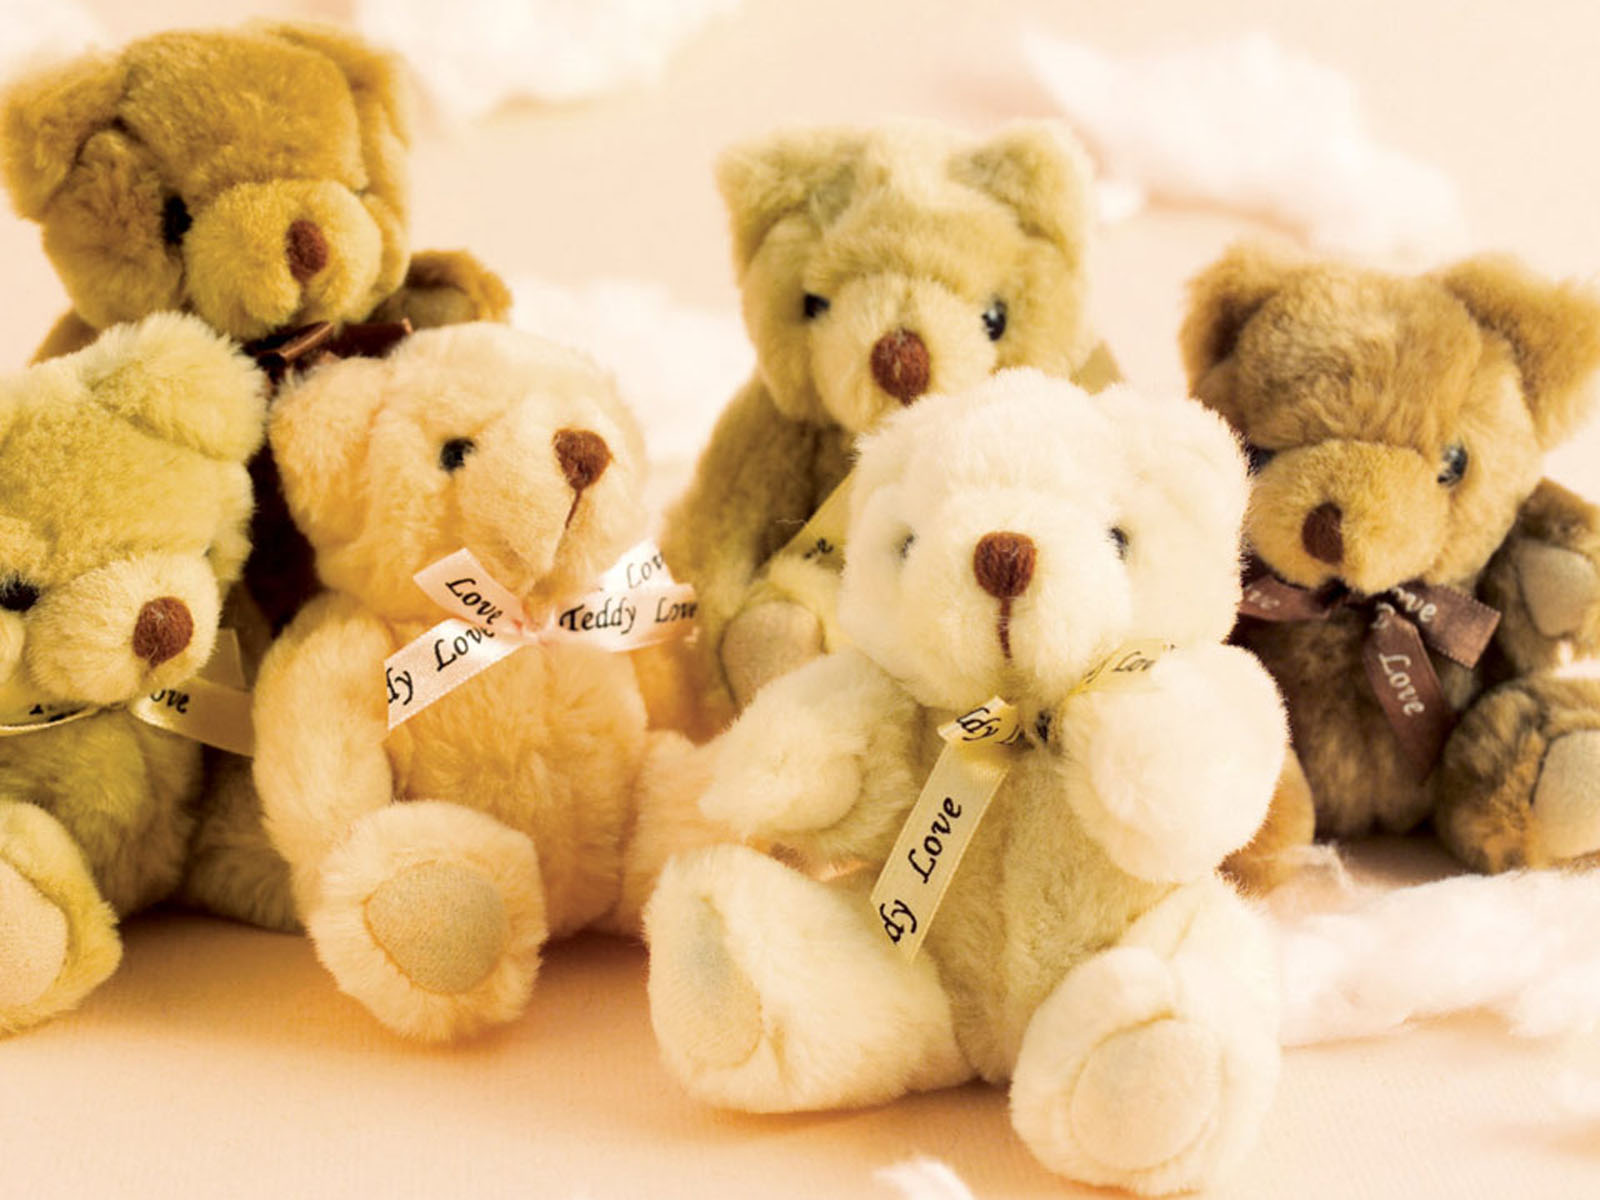 Tag Teddy Bear Wallpaper Image Photos And Pictures For